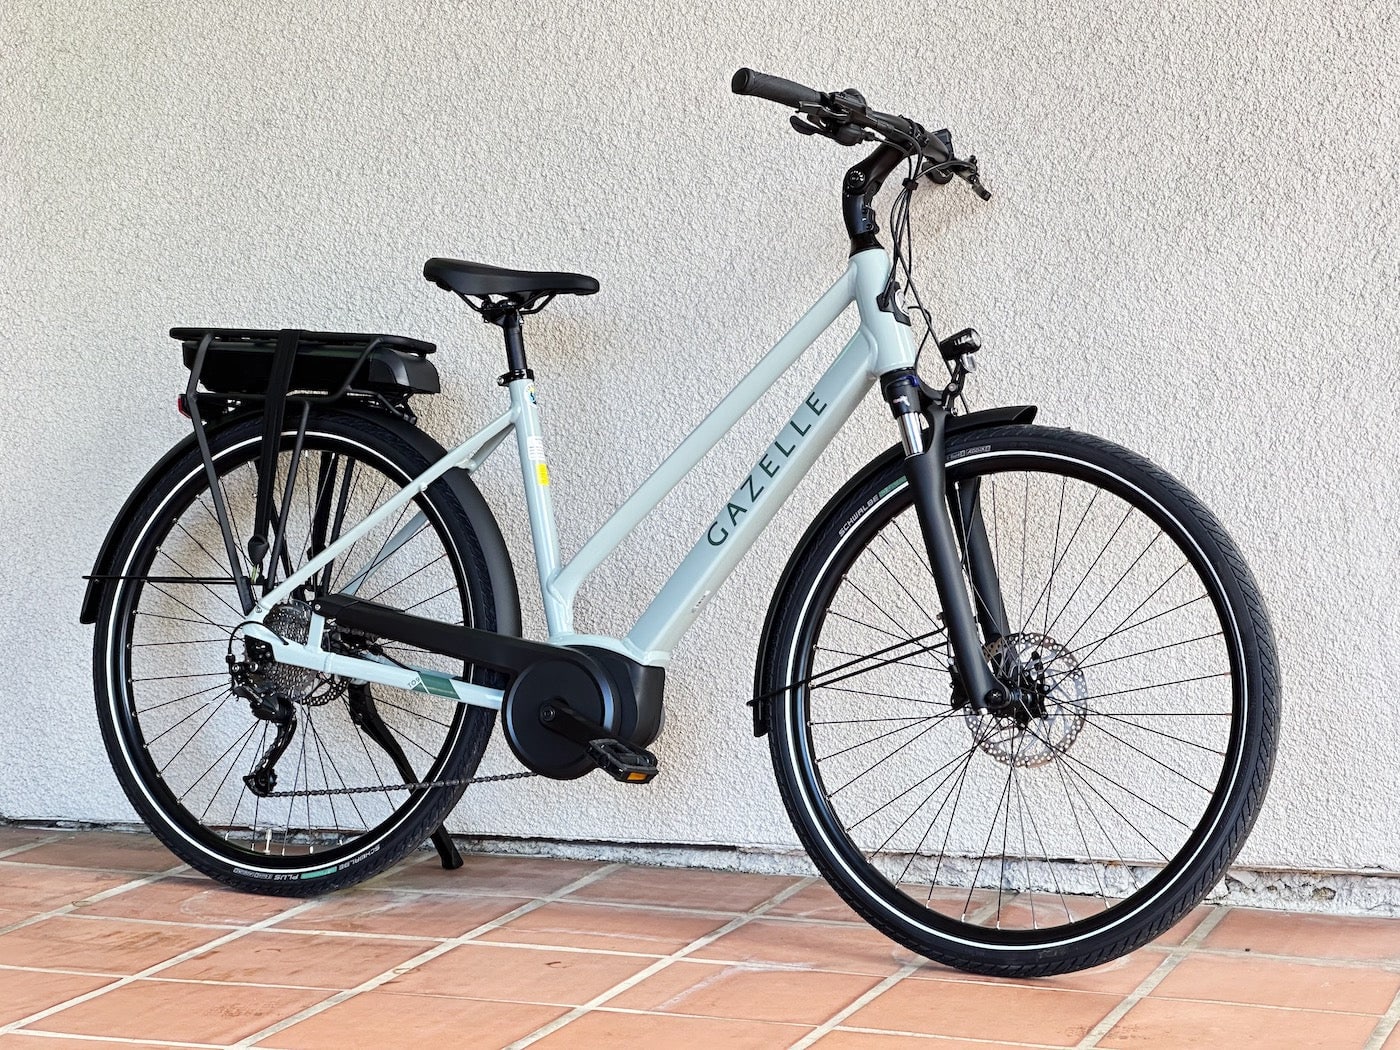 Gazelle Medeo T9 City electric commuter bike review on Fly Rides